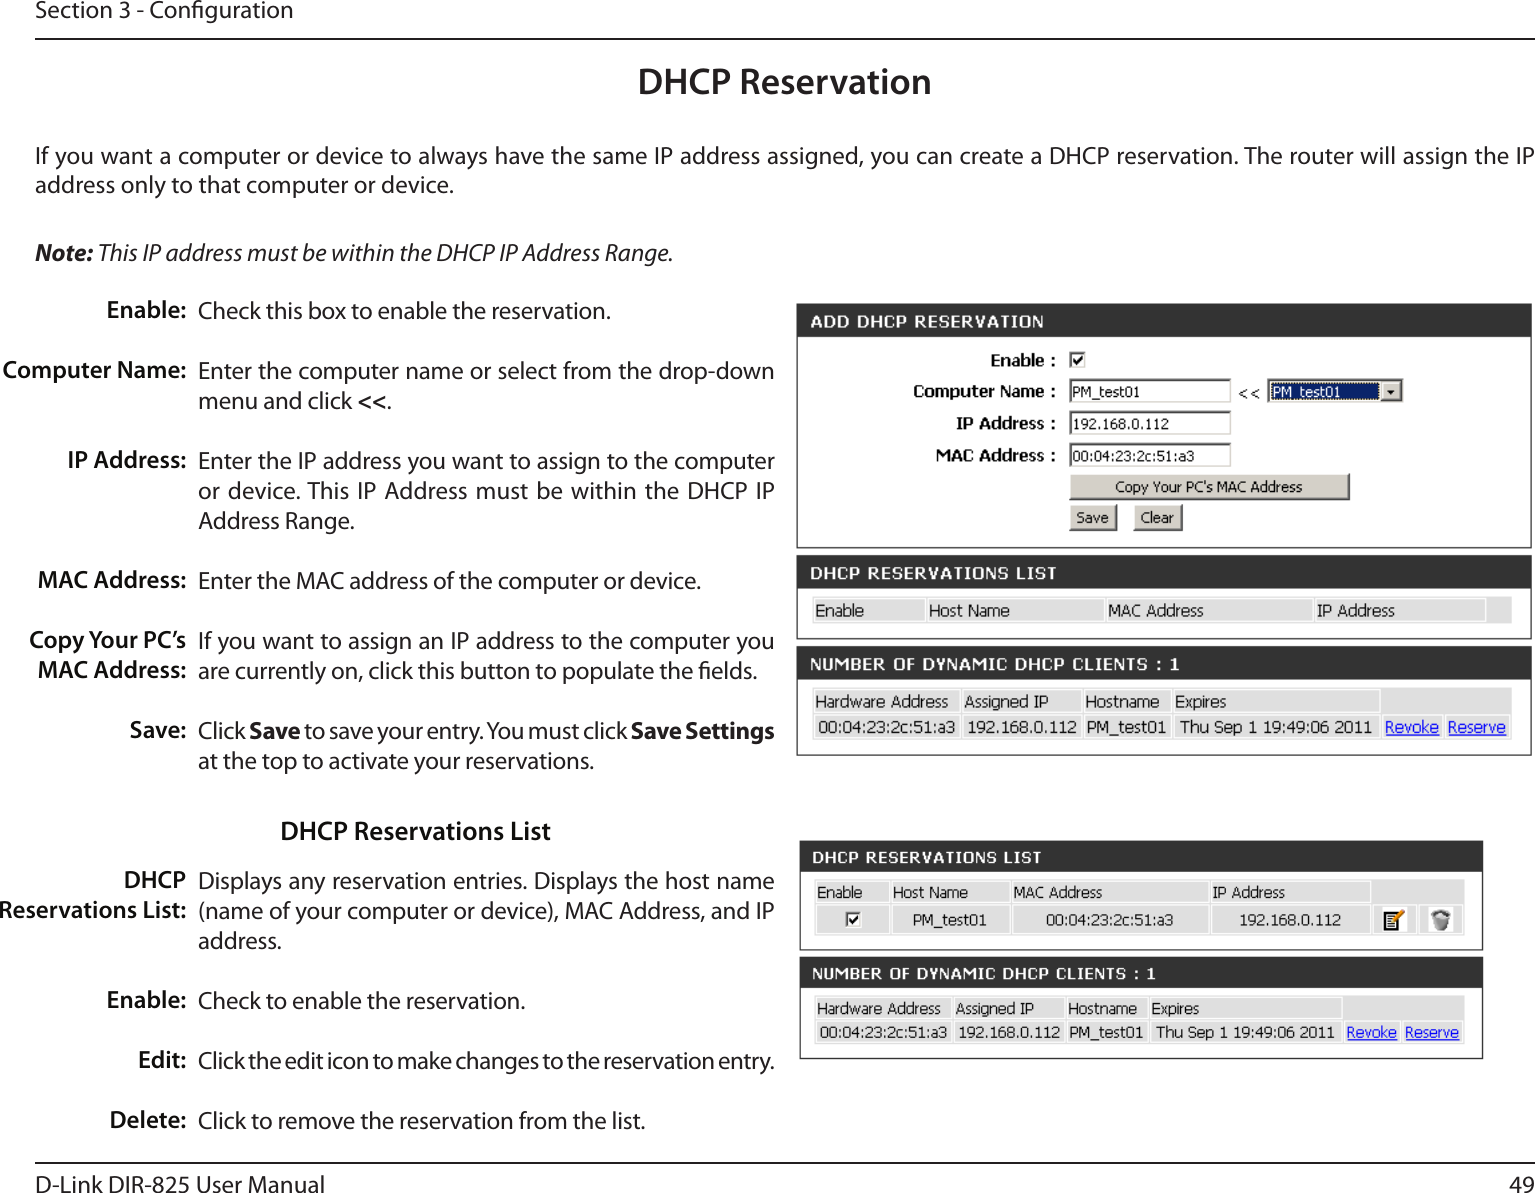 49D-Link DIR-825 User ManualSection 3 - CongurationDHCP ReservationIf you want a computer or device to always have the same IP address assigned, you can create a DHCP reservation. The router will assign the IP address only to that computer or device. Note: This IP address must be within the DHCP IP Address Range.Check this box to enable the reservation.Enter the computer name or select from the drop-down menu and click &lt;&lt;.Enter the IP address you want to assign to the computer or device. This IP Address must be within the  DHCP IP Address Range.Enter the MAC address of the computer or device.If you want to assign an IP address to the computer you are currently on, click this button to populate the elds. Click Save to save your entry. You must click Save Settings at the top to activate your reservations. Displays any reservation entries. Displays the host name (name of your computer or device), MAC Address, and IP address.Check to enable the reservation.Click the edit icon to make changes to the reservation entry.Click to remove the reservation from the list.Enable:Computer Name:IP Address:MAC Address:Copy Your PC’s MAC Address:Save:DHCP Reservations List:Enable:Edit:Delete:DHCP Reservations List